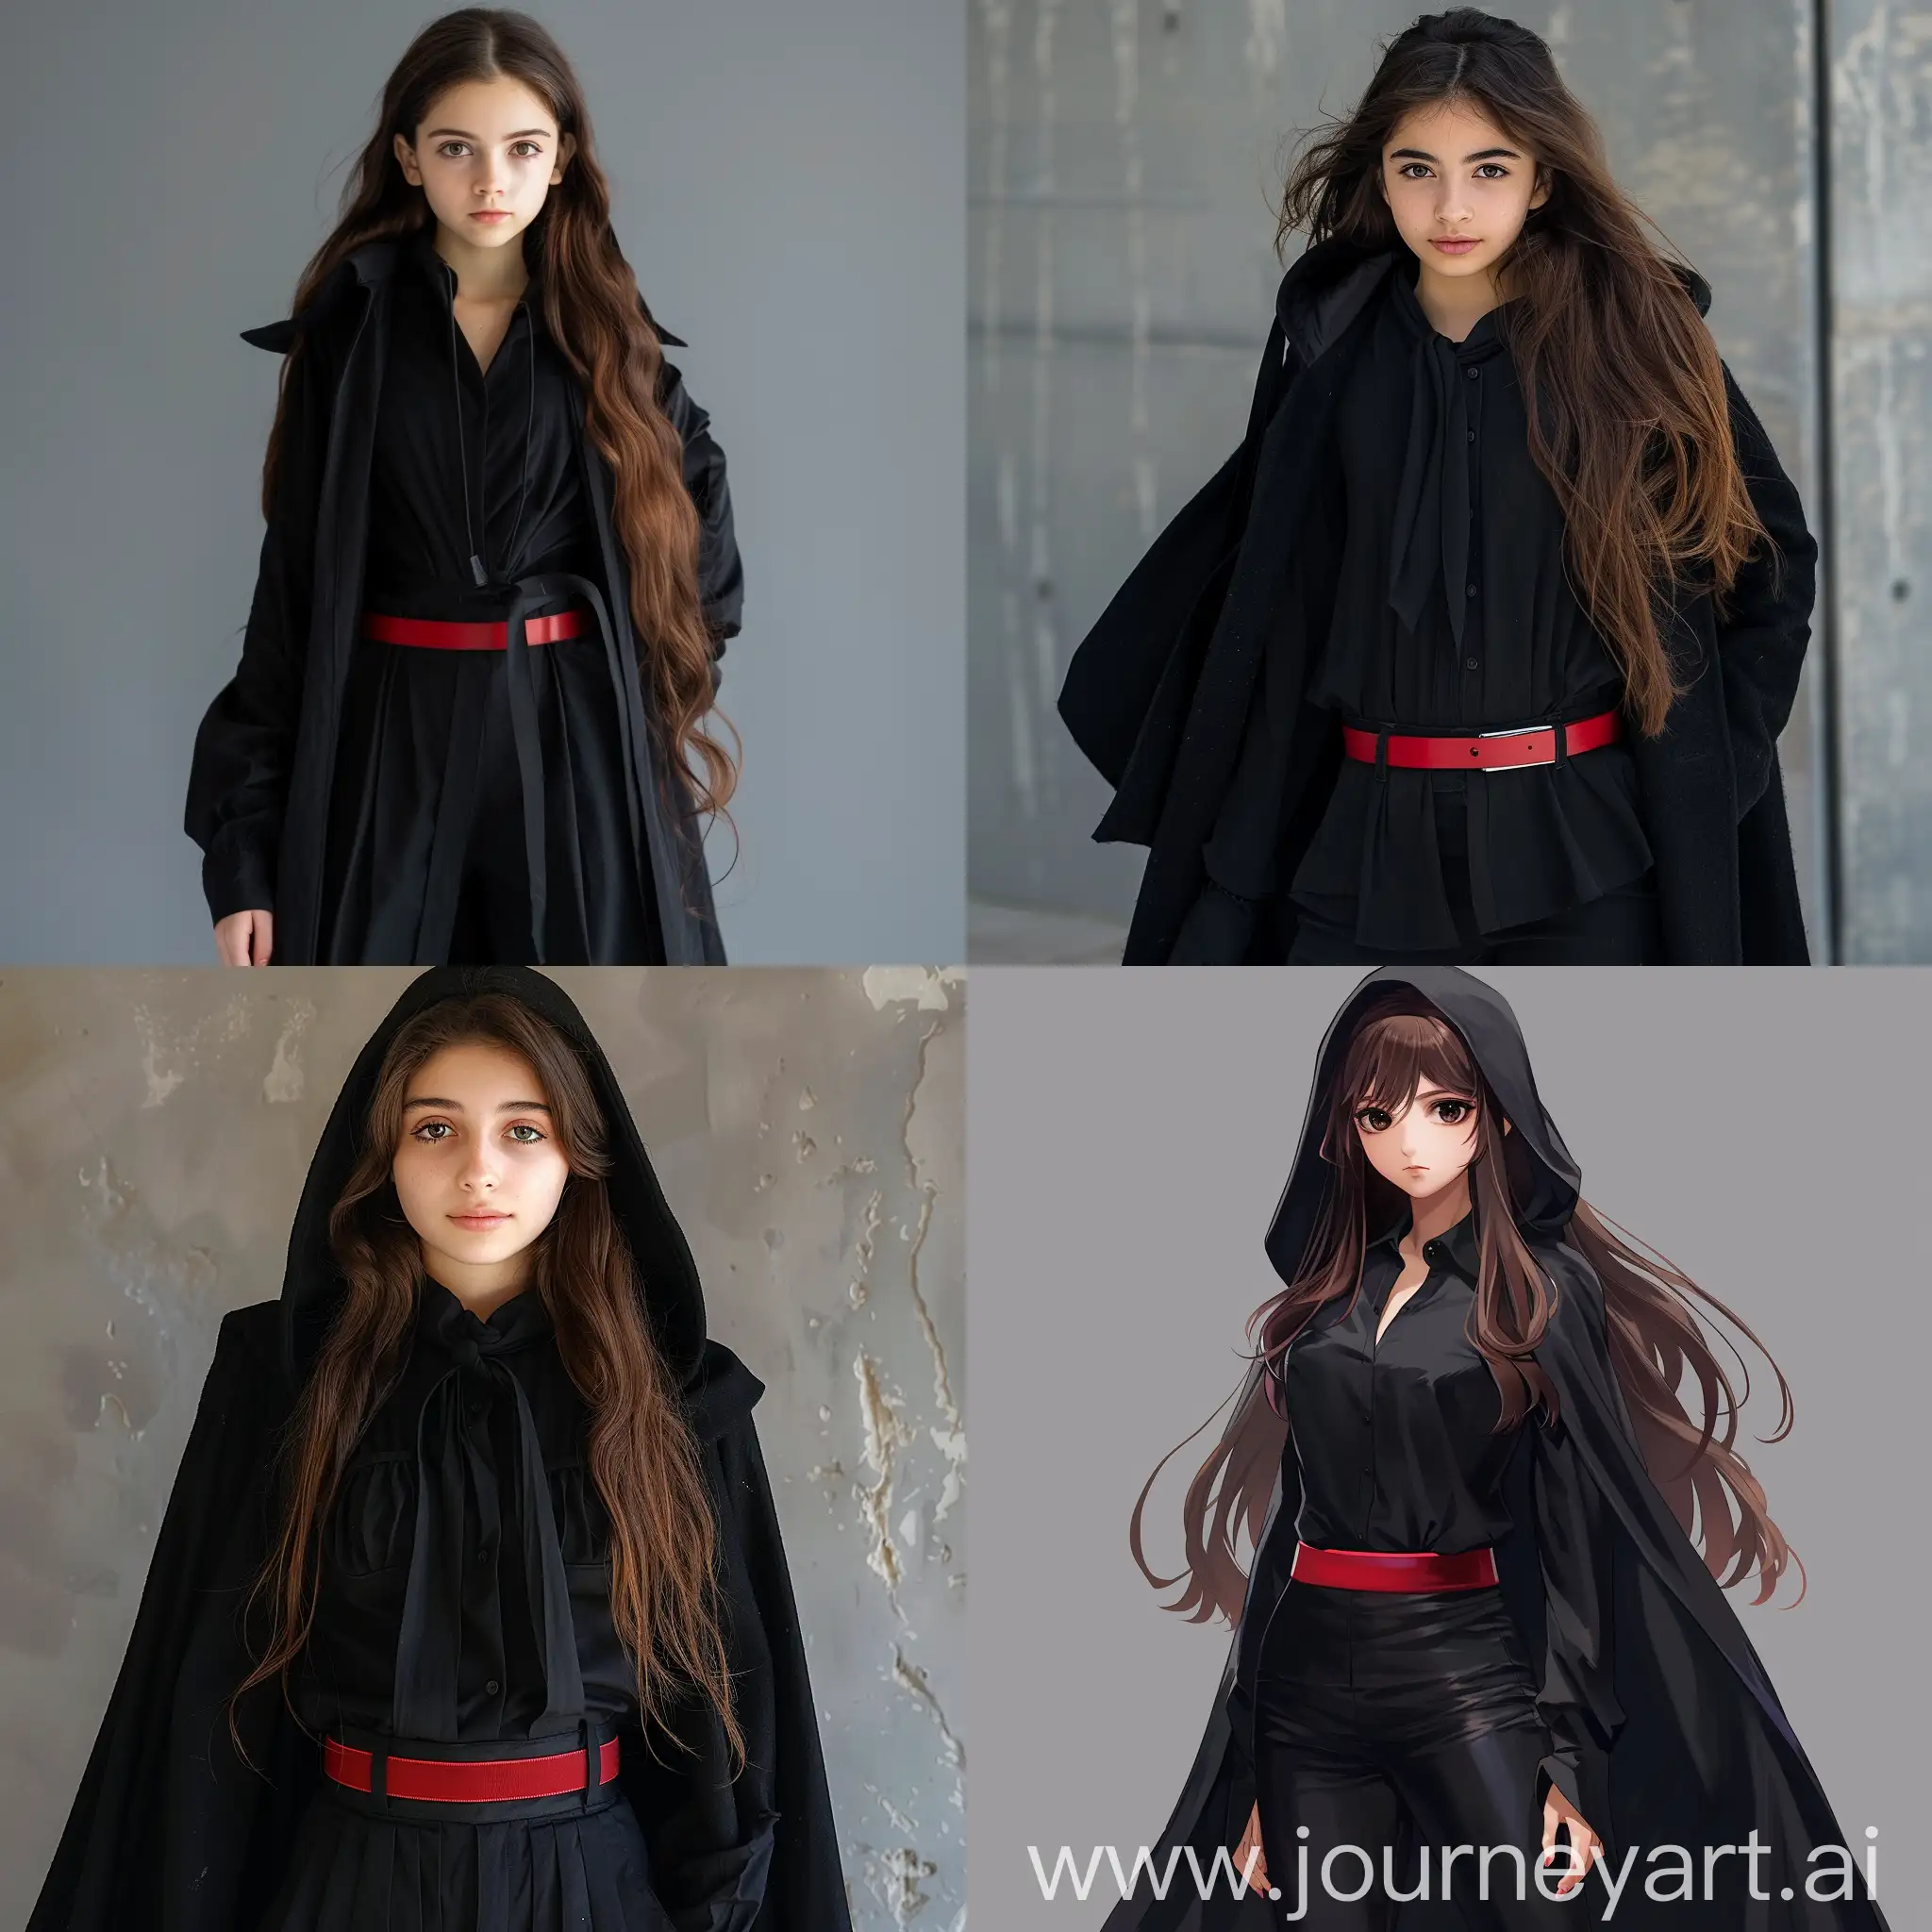 Stylish-Teen-Girl-in-Black-Outfit-with-Red-Accent-Belt